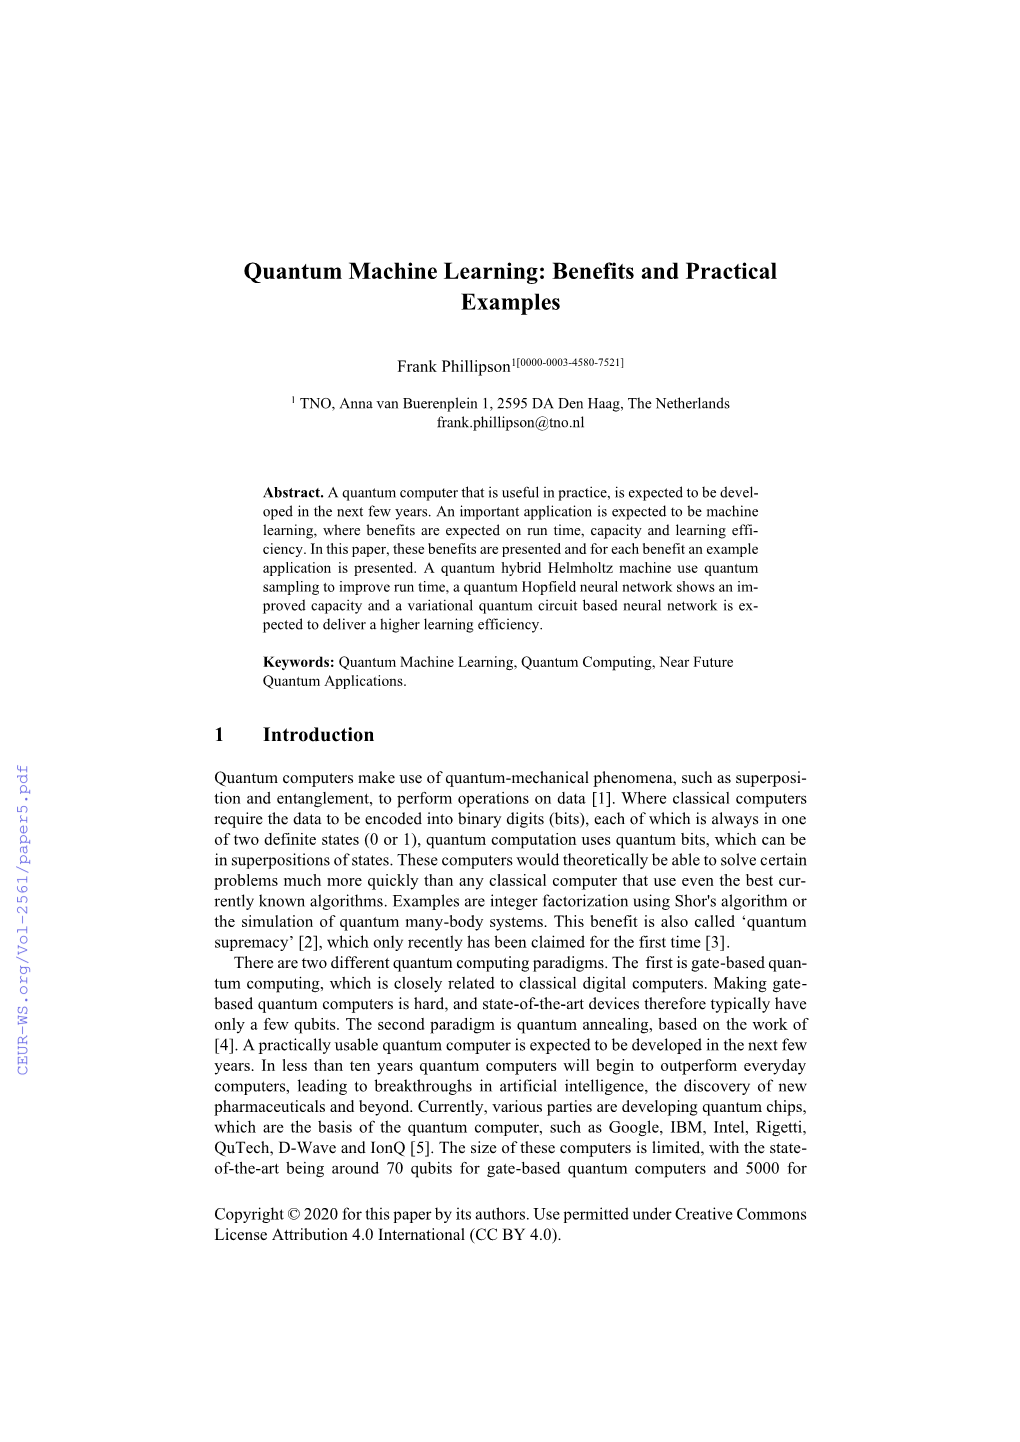 Quantum Machine Learning: Benefits and Practical Examples